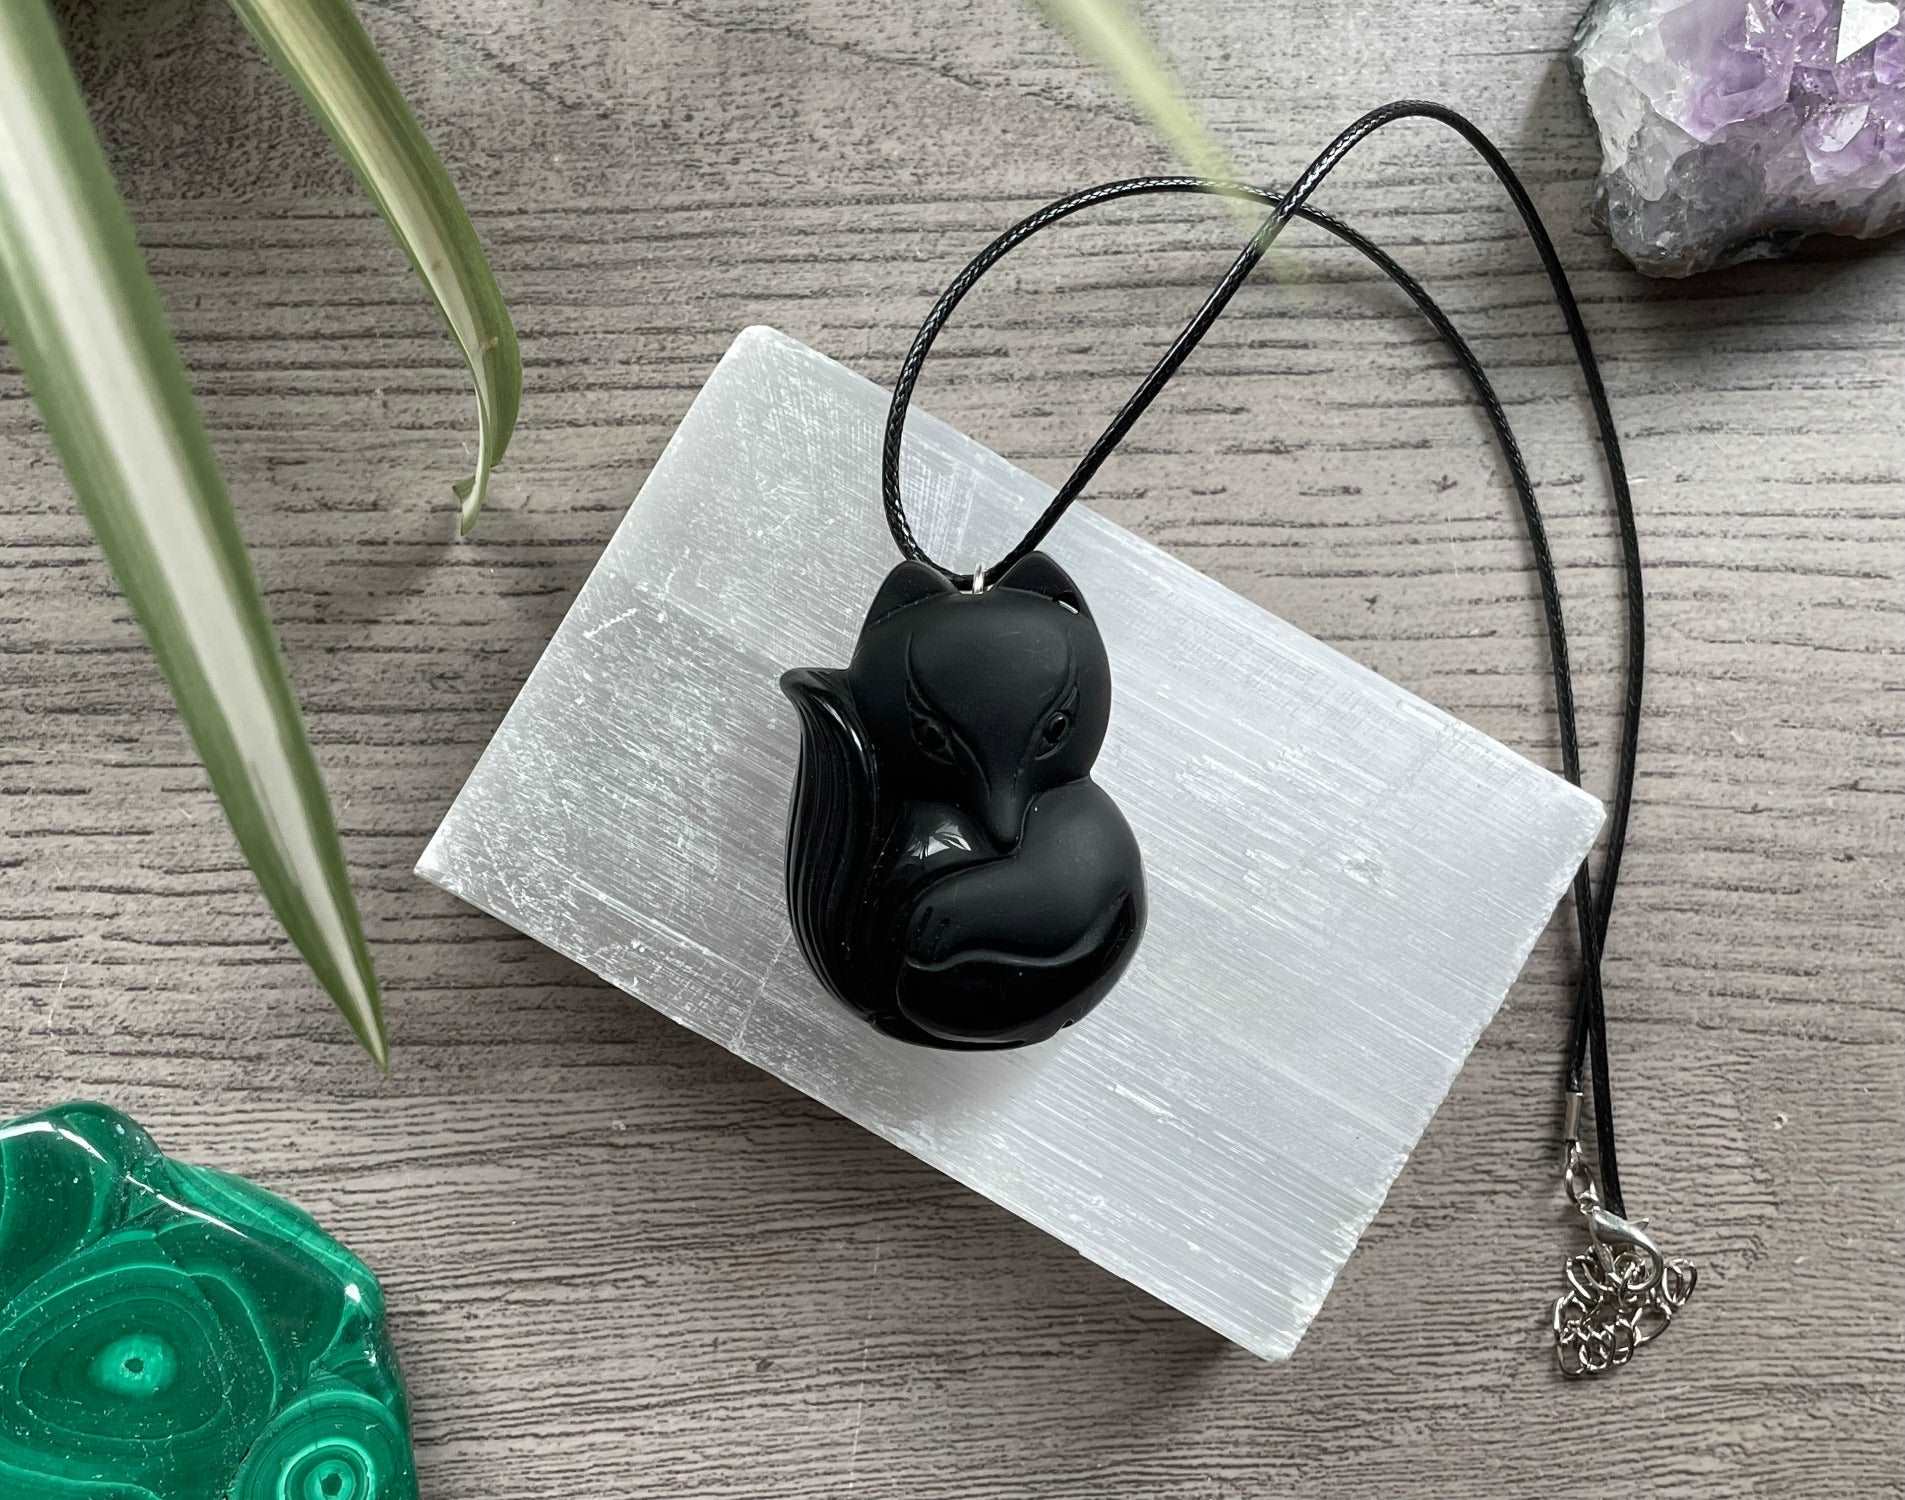 Pictured is a faux obsidian pendant of a fox.